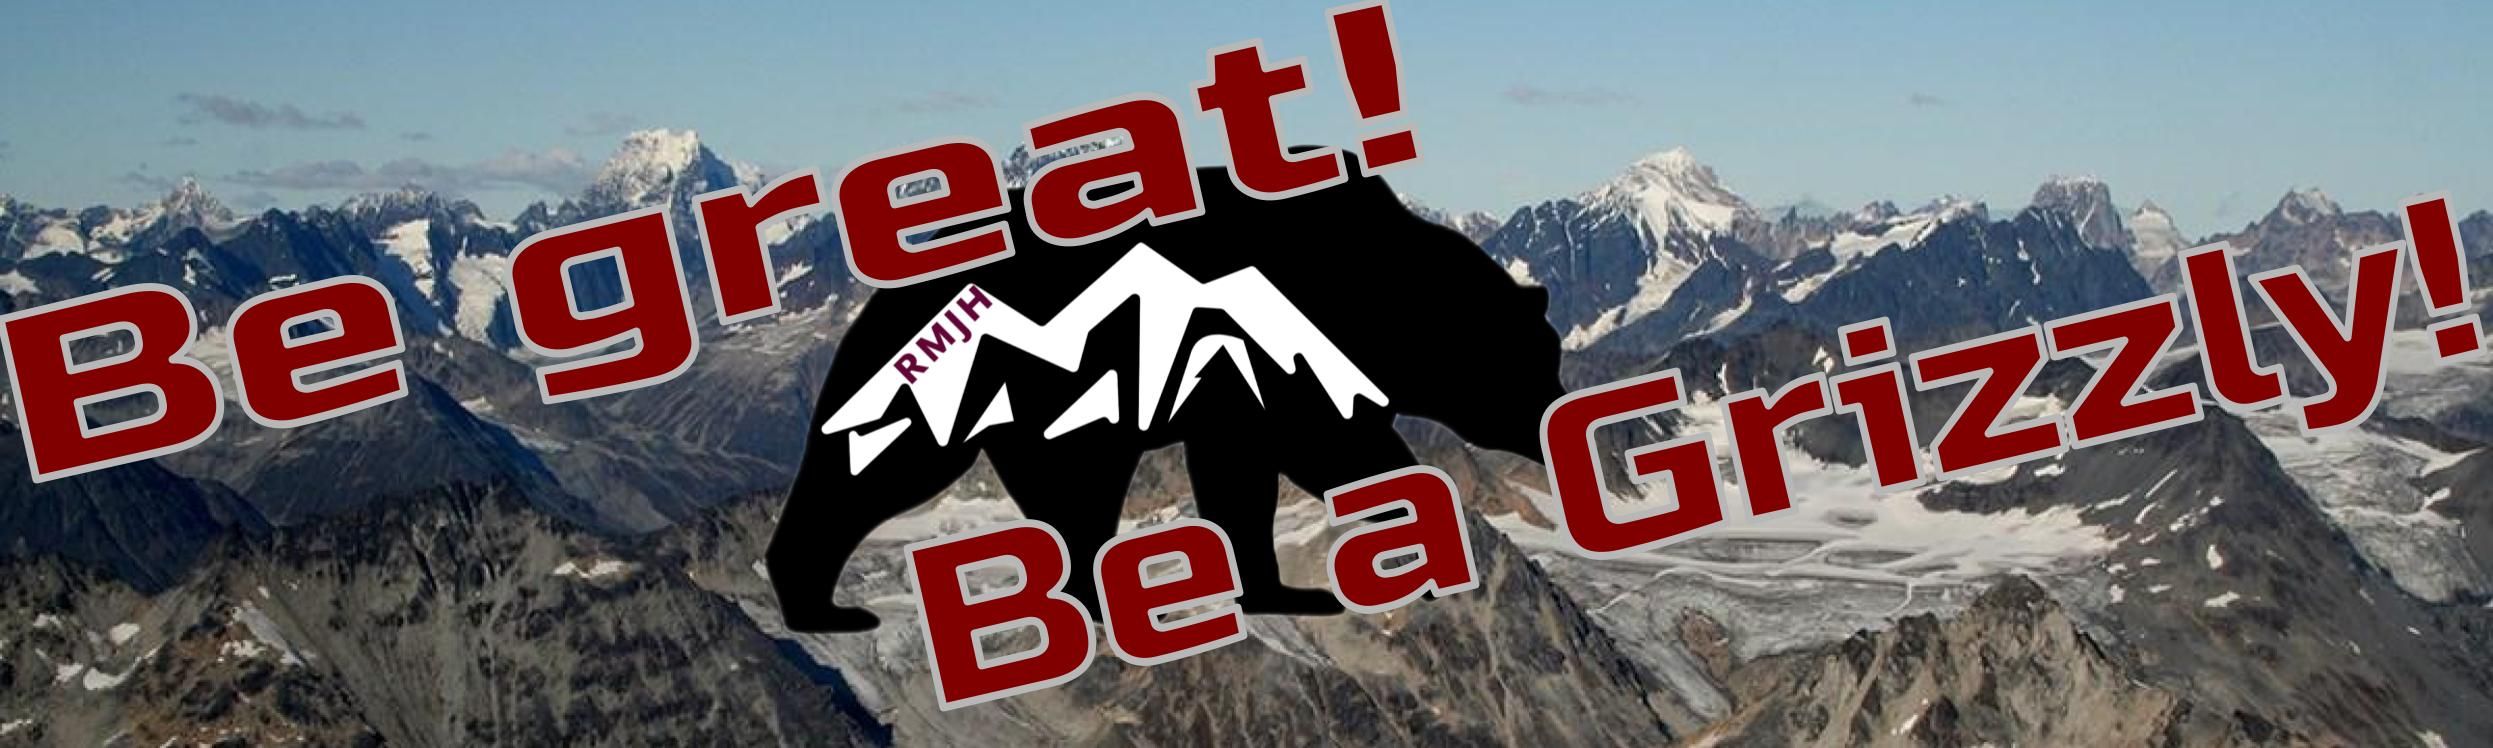 Be great! Be a Grizzly! with an image of a grizzly bear on a mountain range background.